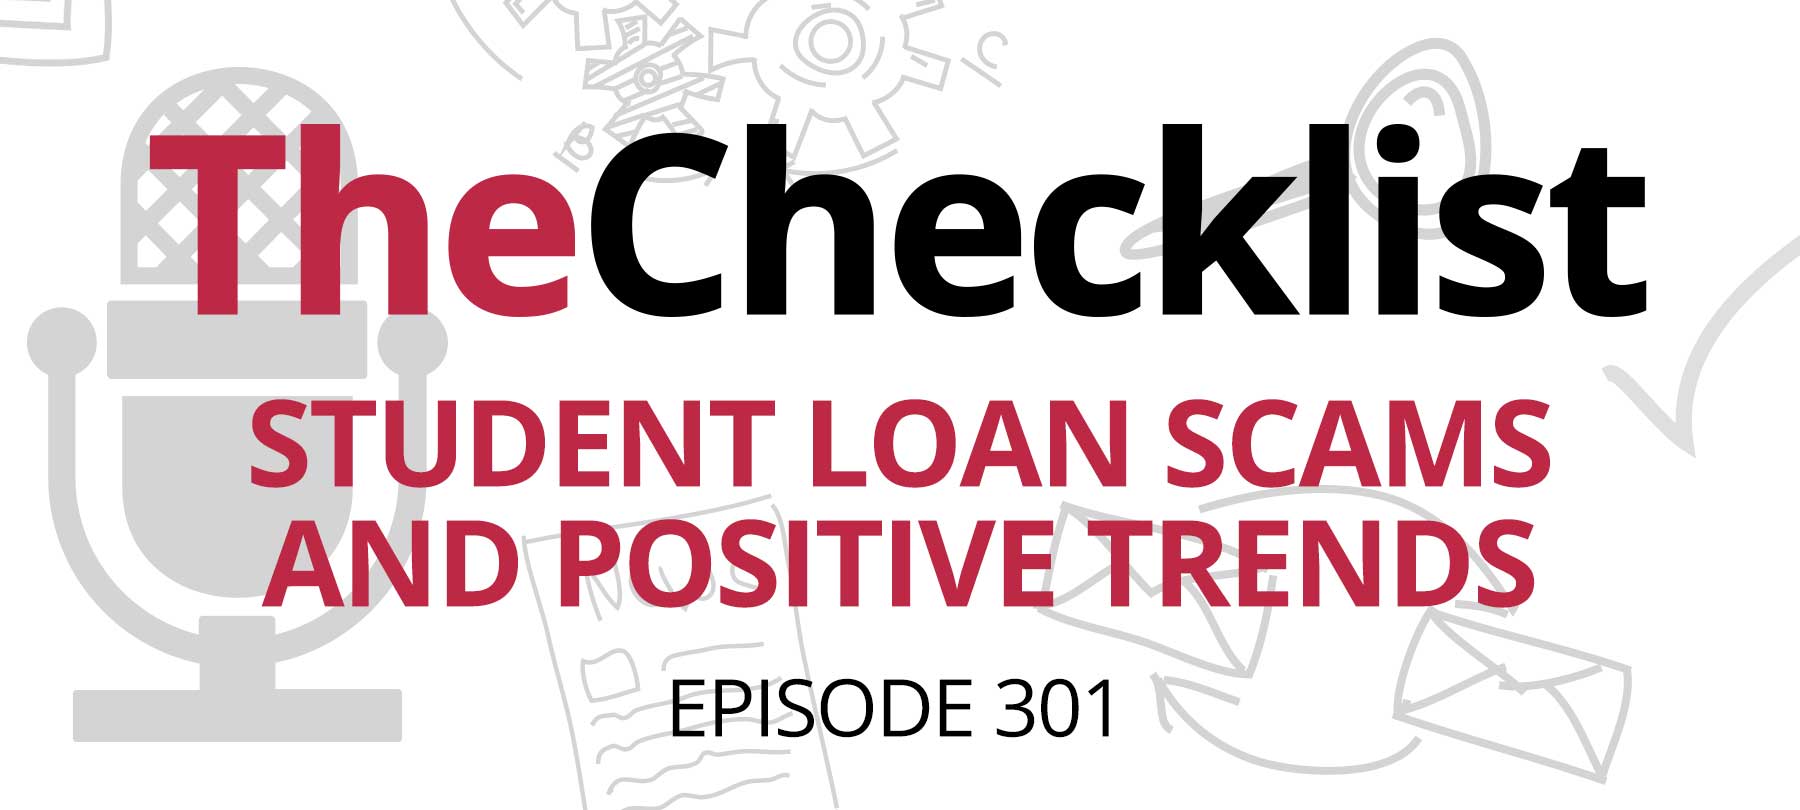 Checklist 301: Student Loan Scams and Positive Trends￼